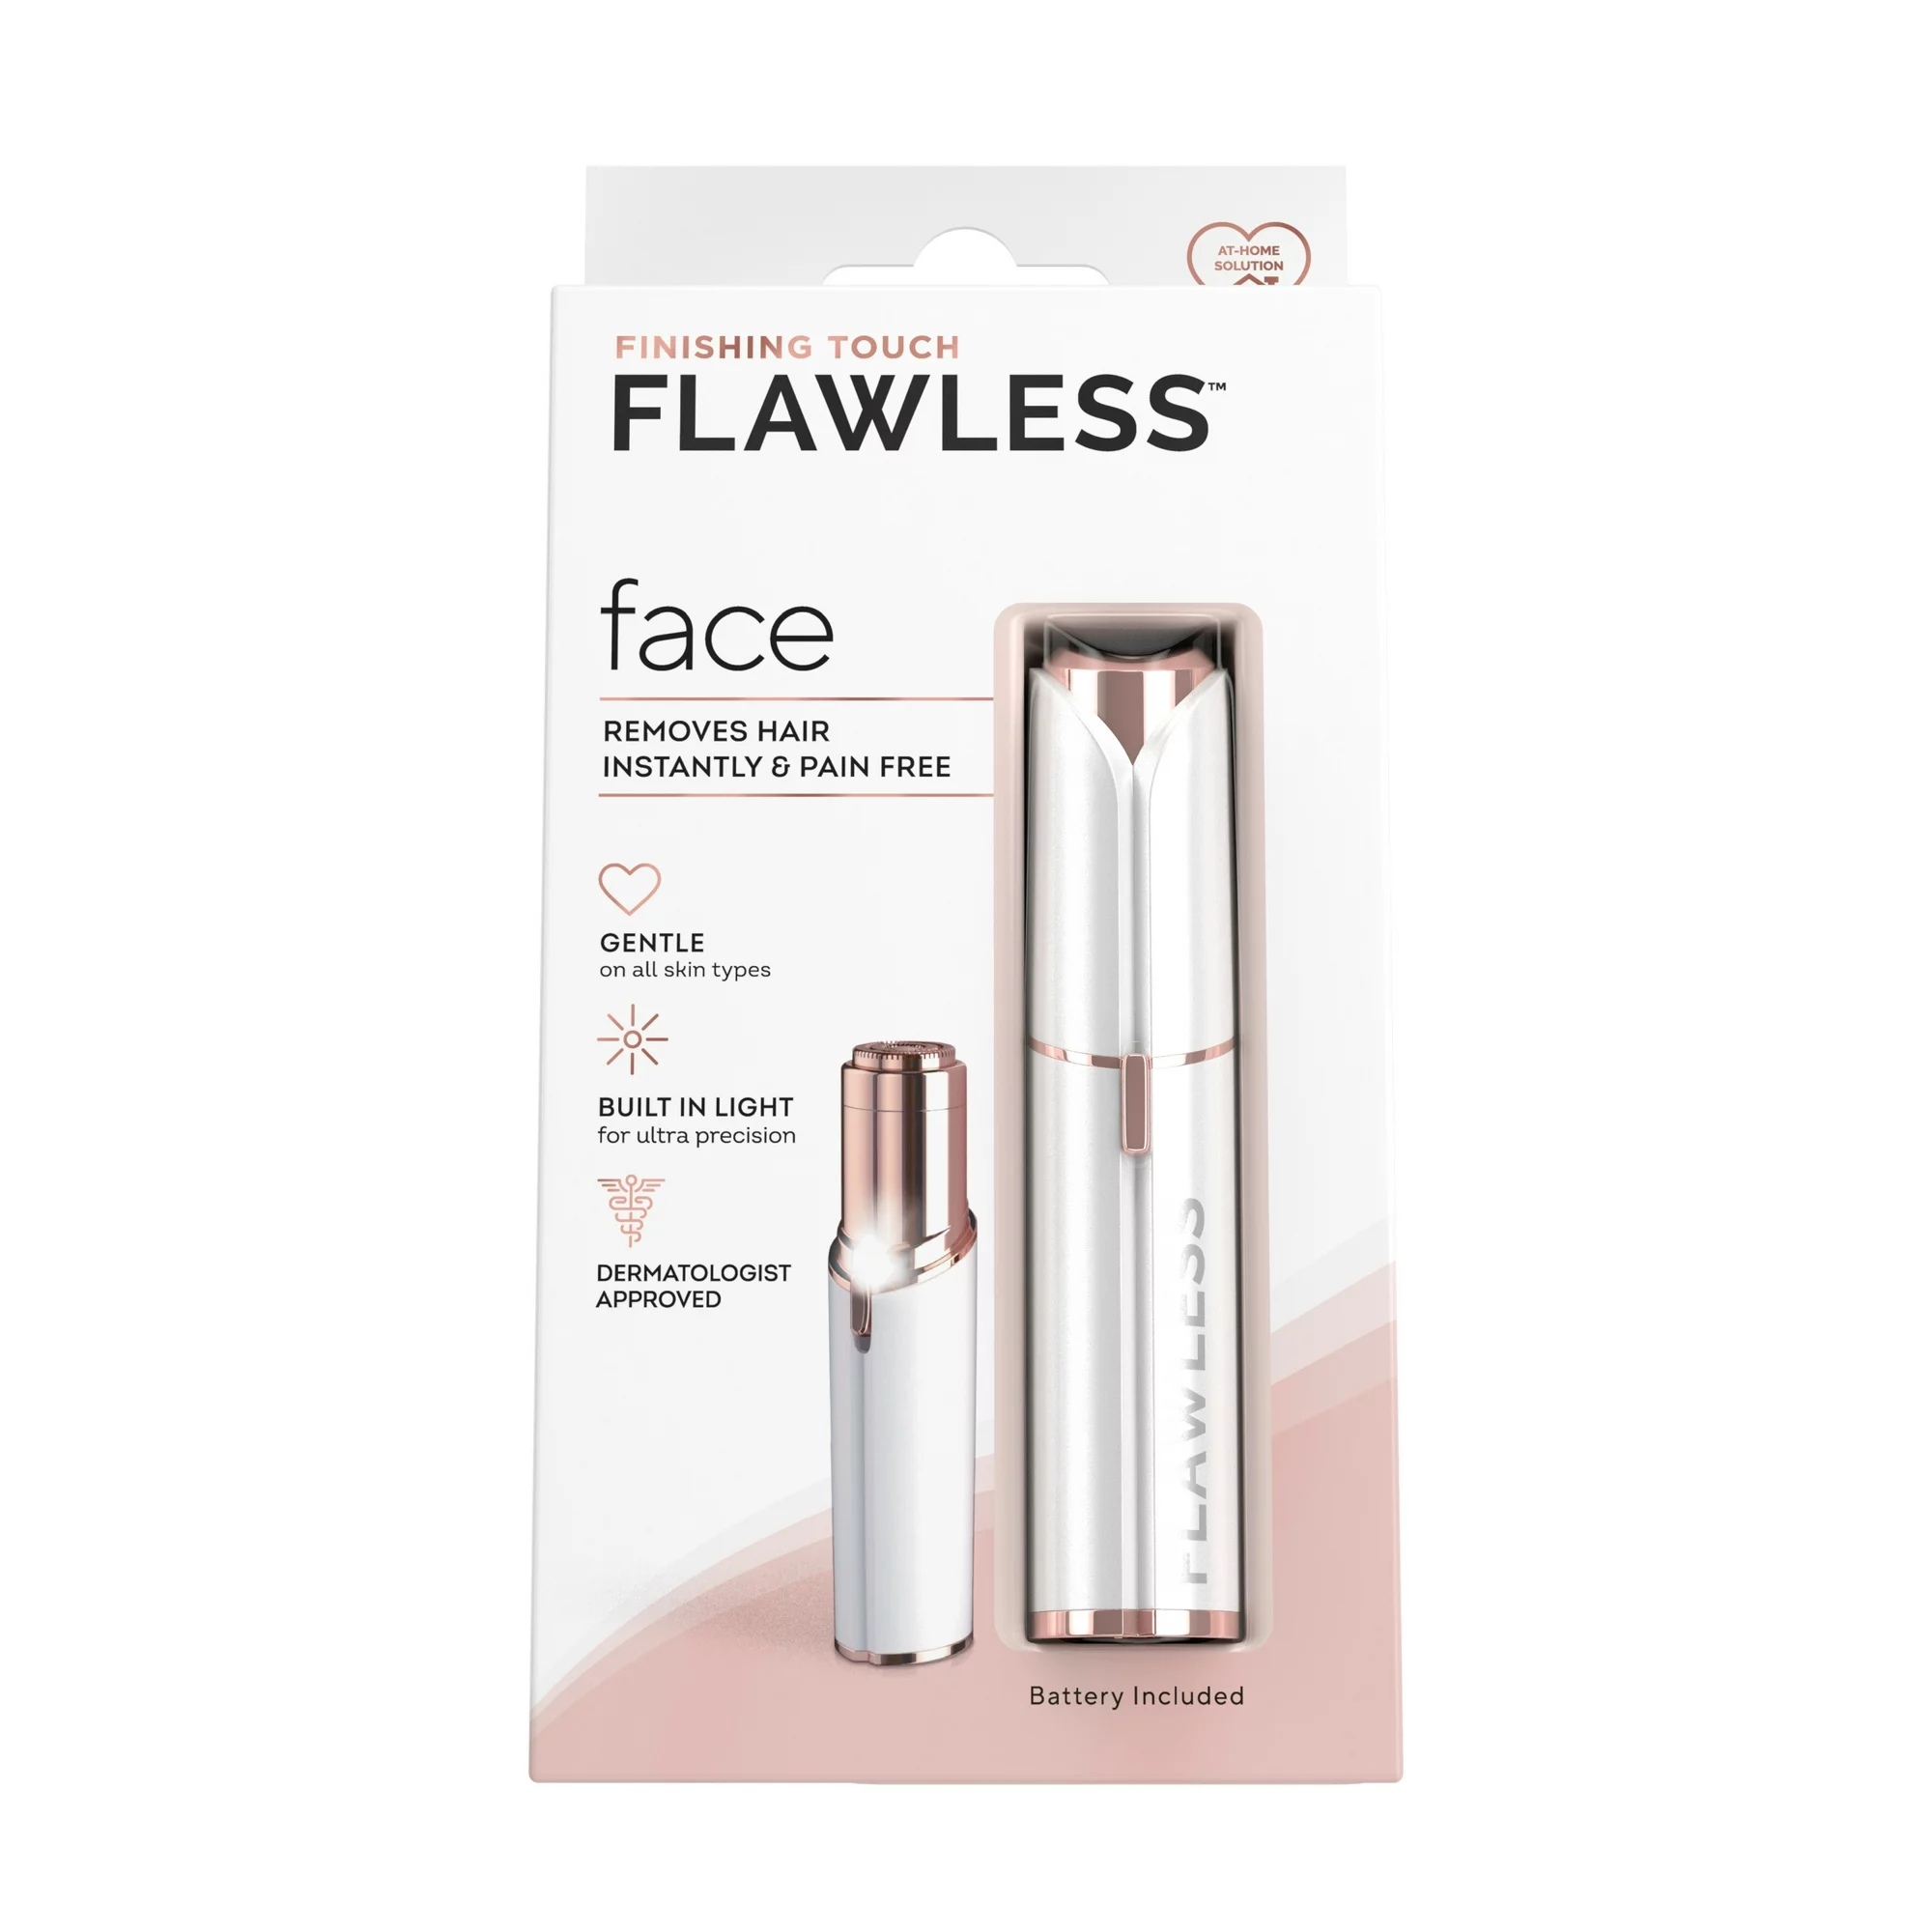 https://assets.mikmak.workers.dev/mVJsEXGaQVOLTkSNmaaP_Finishing-Touch-Flawless-Facial-Hair-Remover-for-Women-White-Rose-Gold-Electric-Face-Razor-with-LED-Light_65e0d5b6-1fe6-4247-ac45-7704a200fc6d.de3ae09a1c770298109895d019c6a6f7.webp